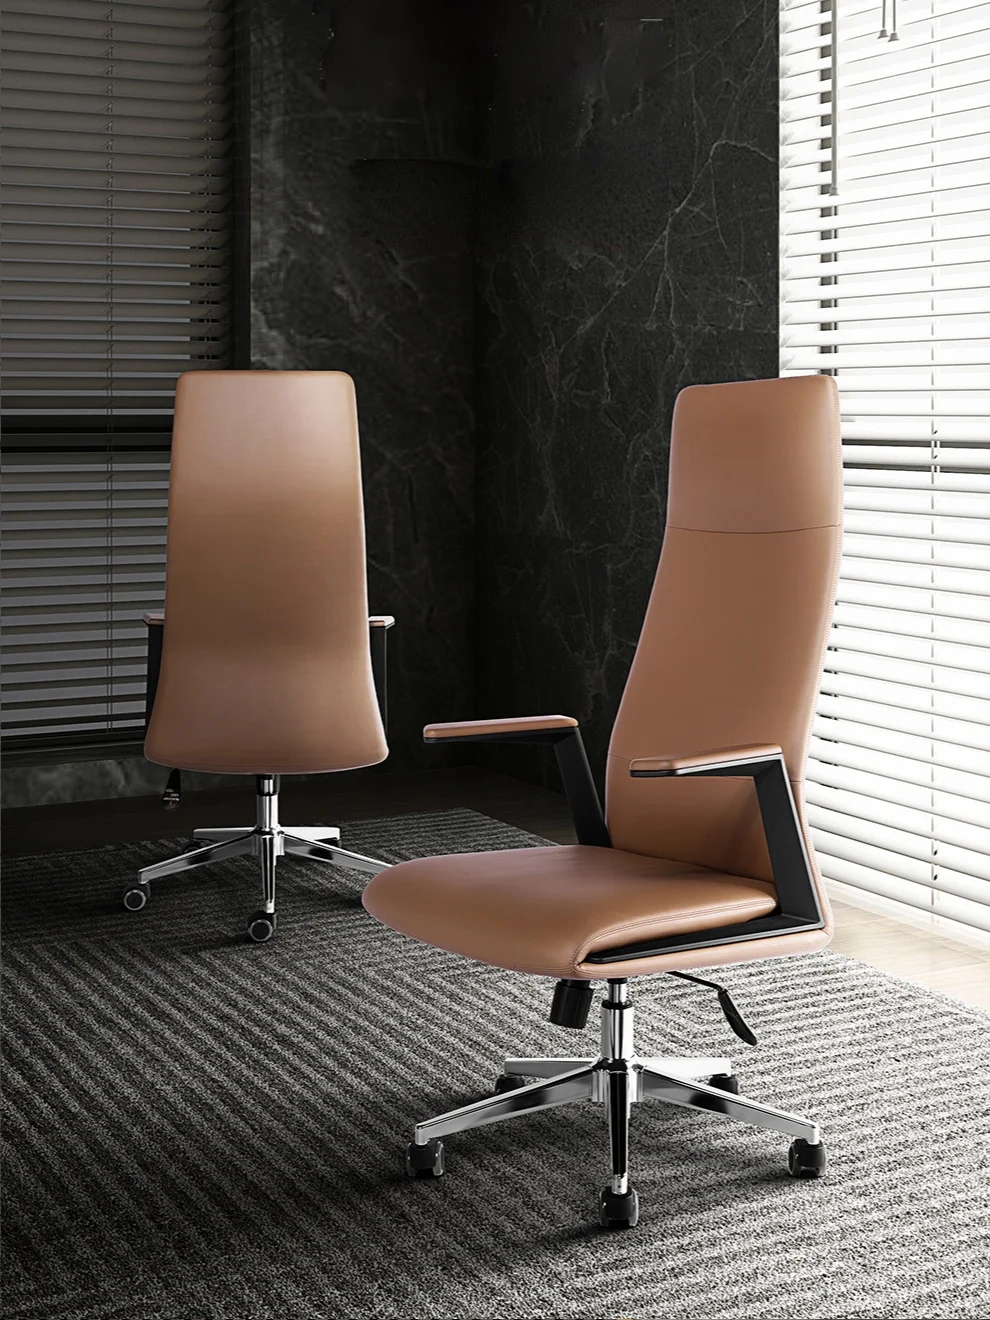 

GY Light Luxury Genuine Leather Executive Chair Genuine Leather Chair Computer Chair Executive Chair Leather High Back Seat